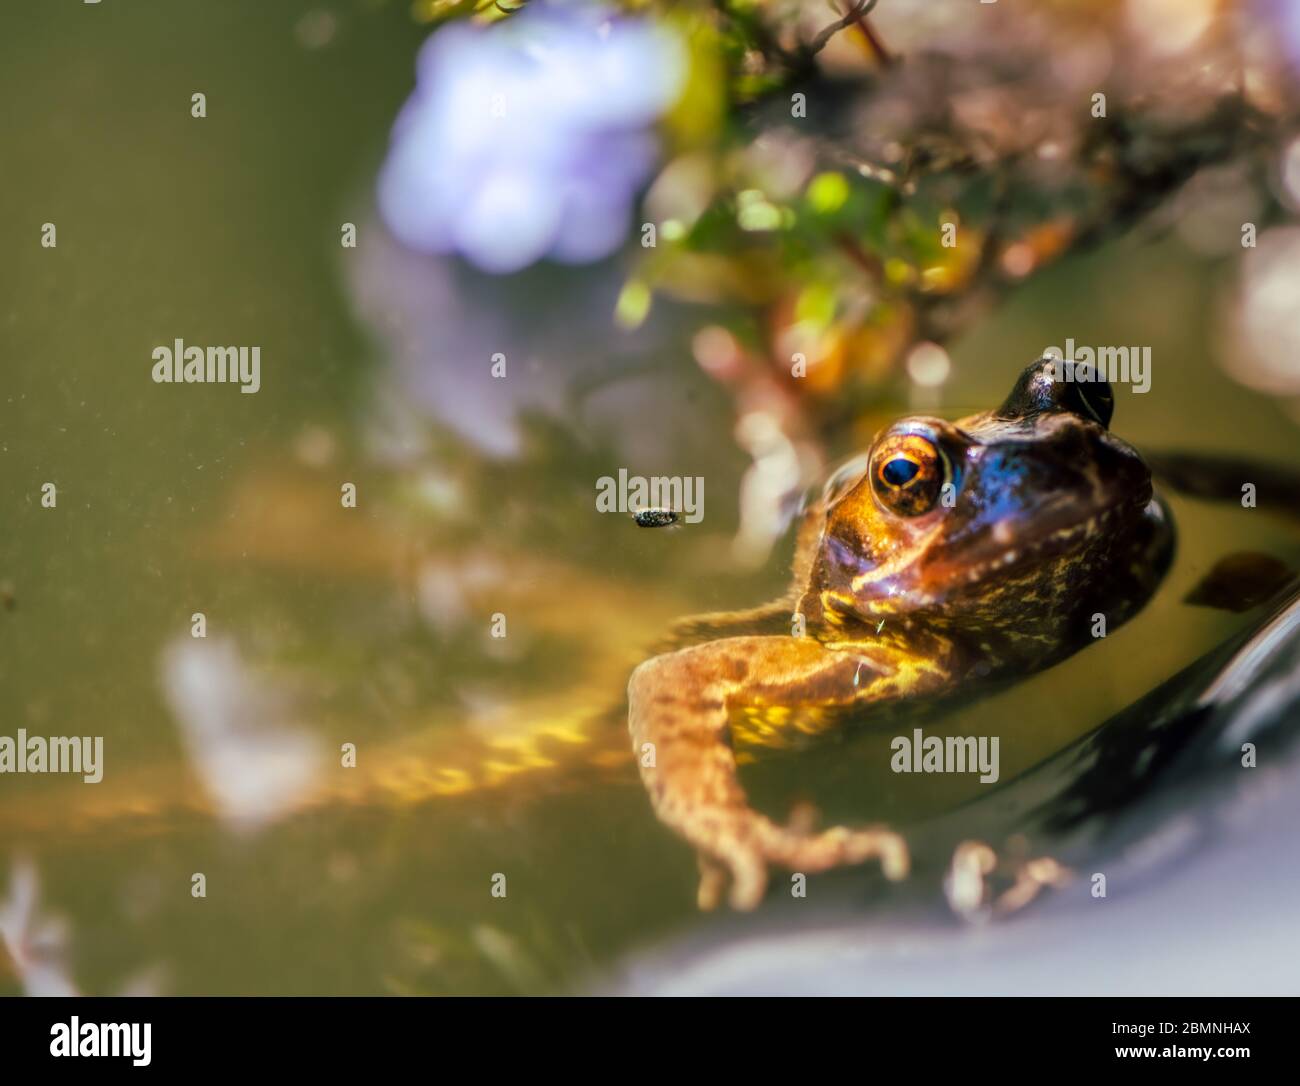 Coming up for air, a frog peering out of a pond, Burbage, Wiltshire, UK Stock Photo